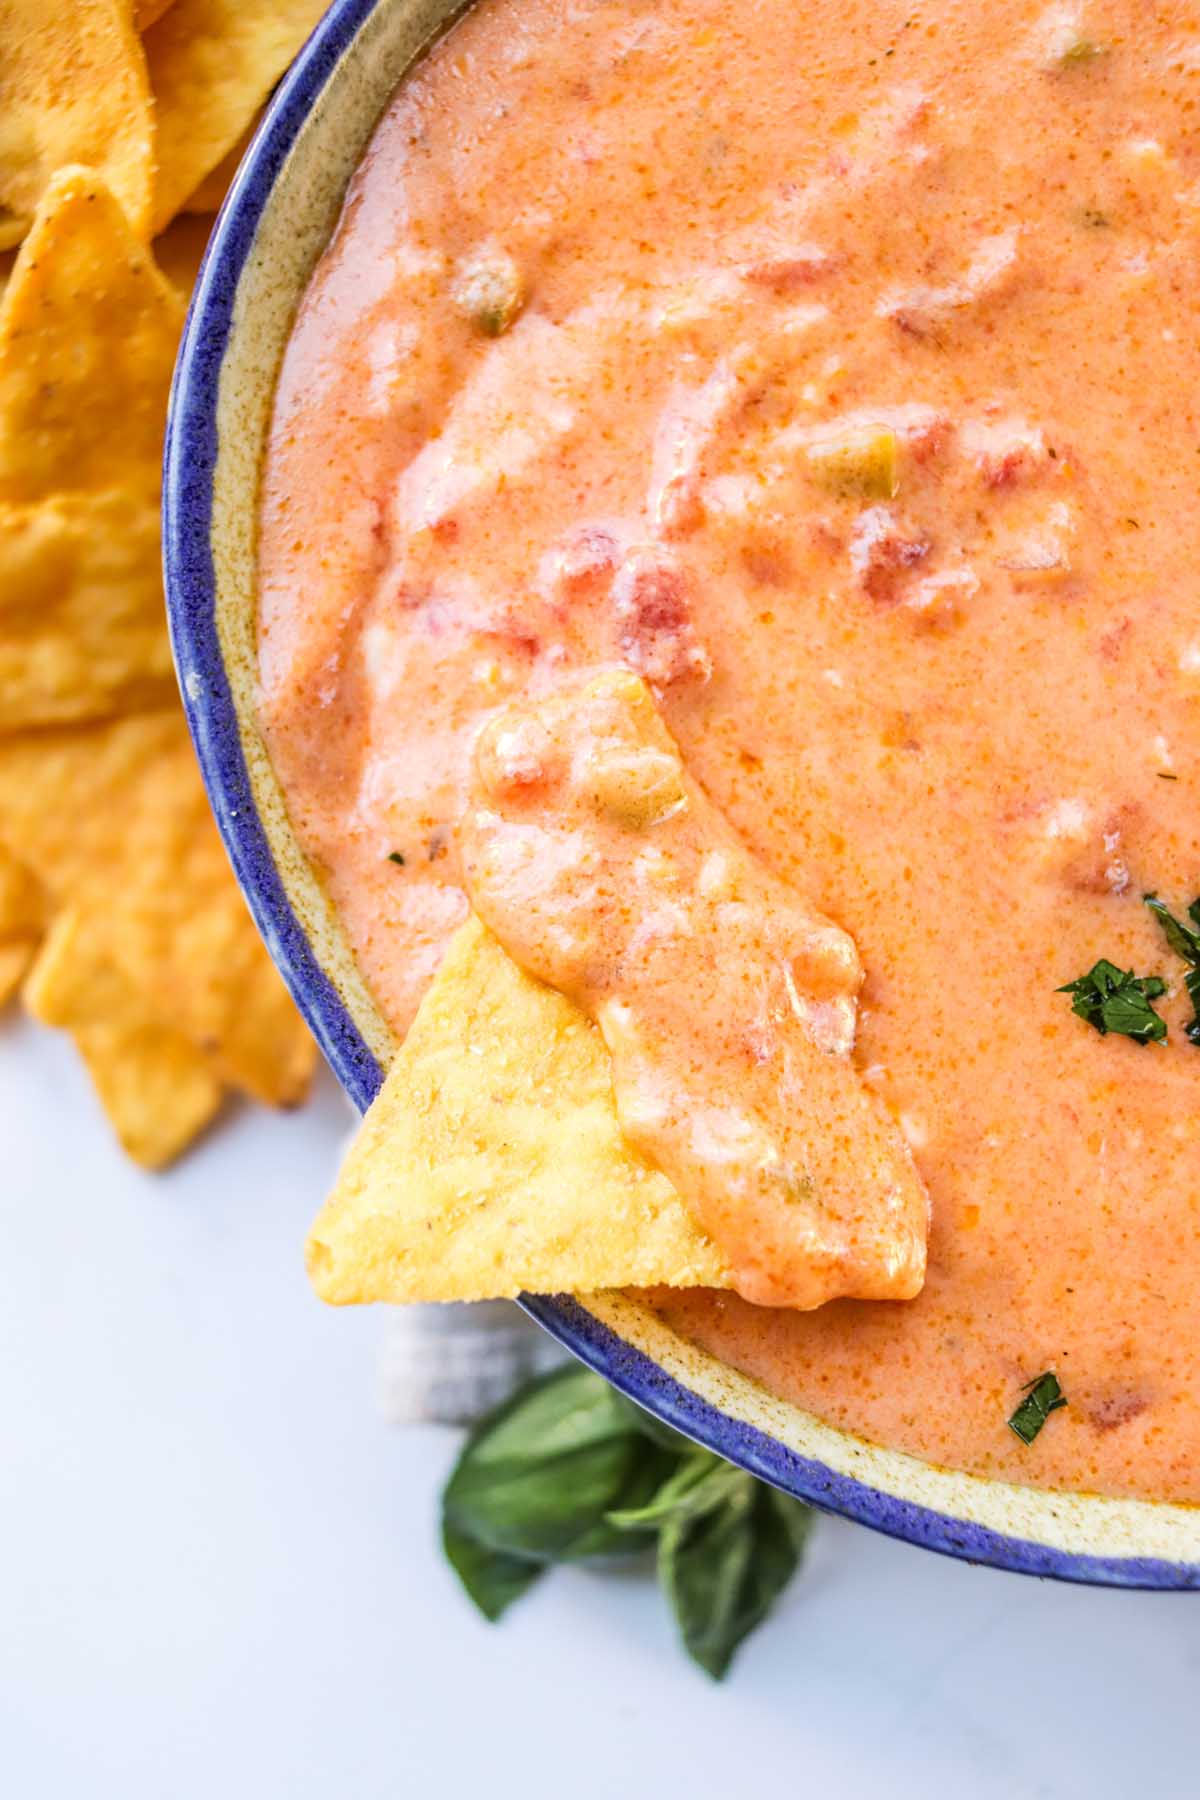 A chip dipped in a bowl of queso.